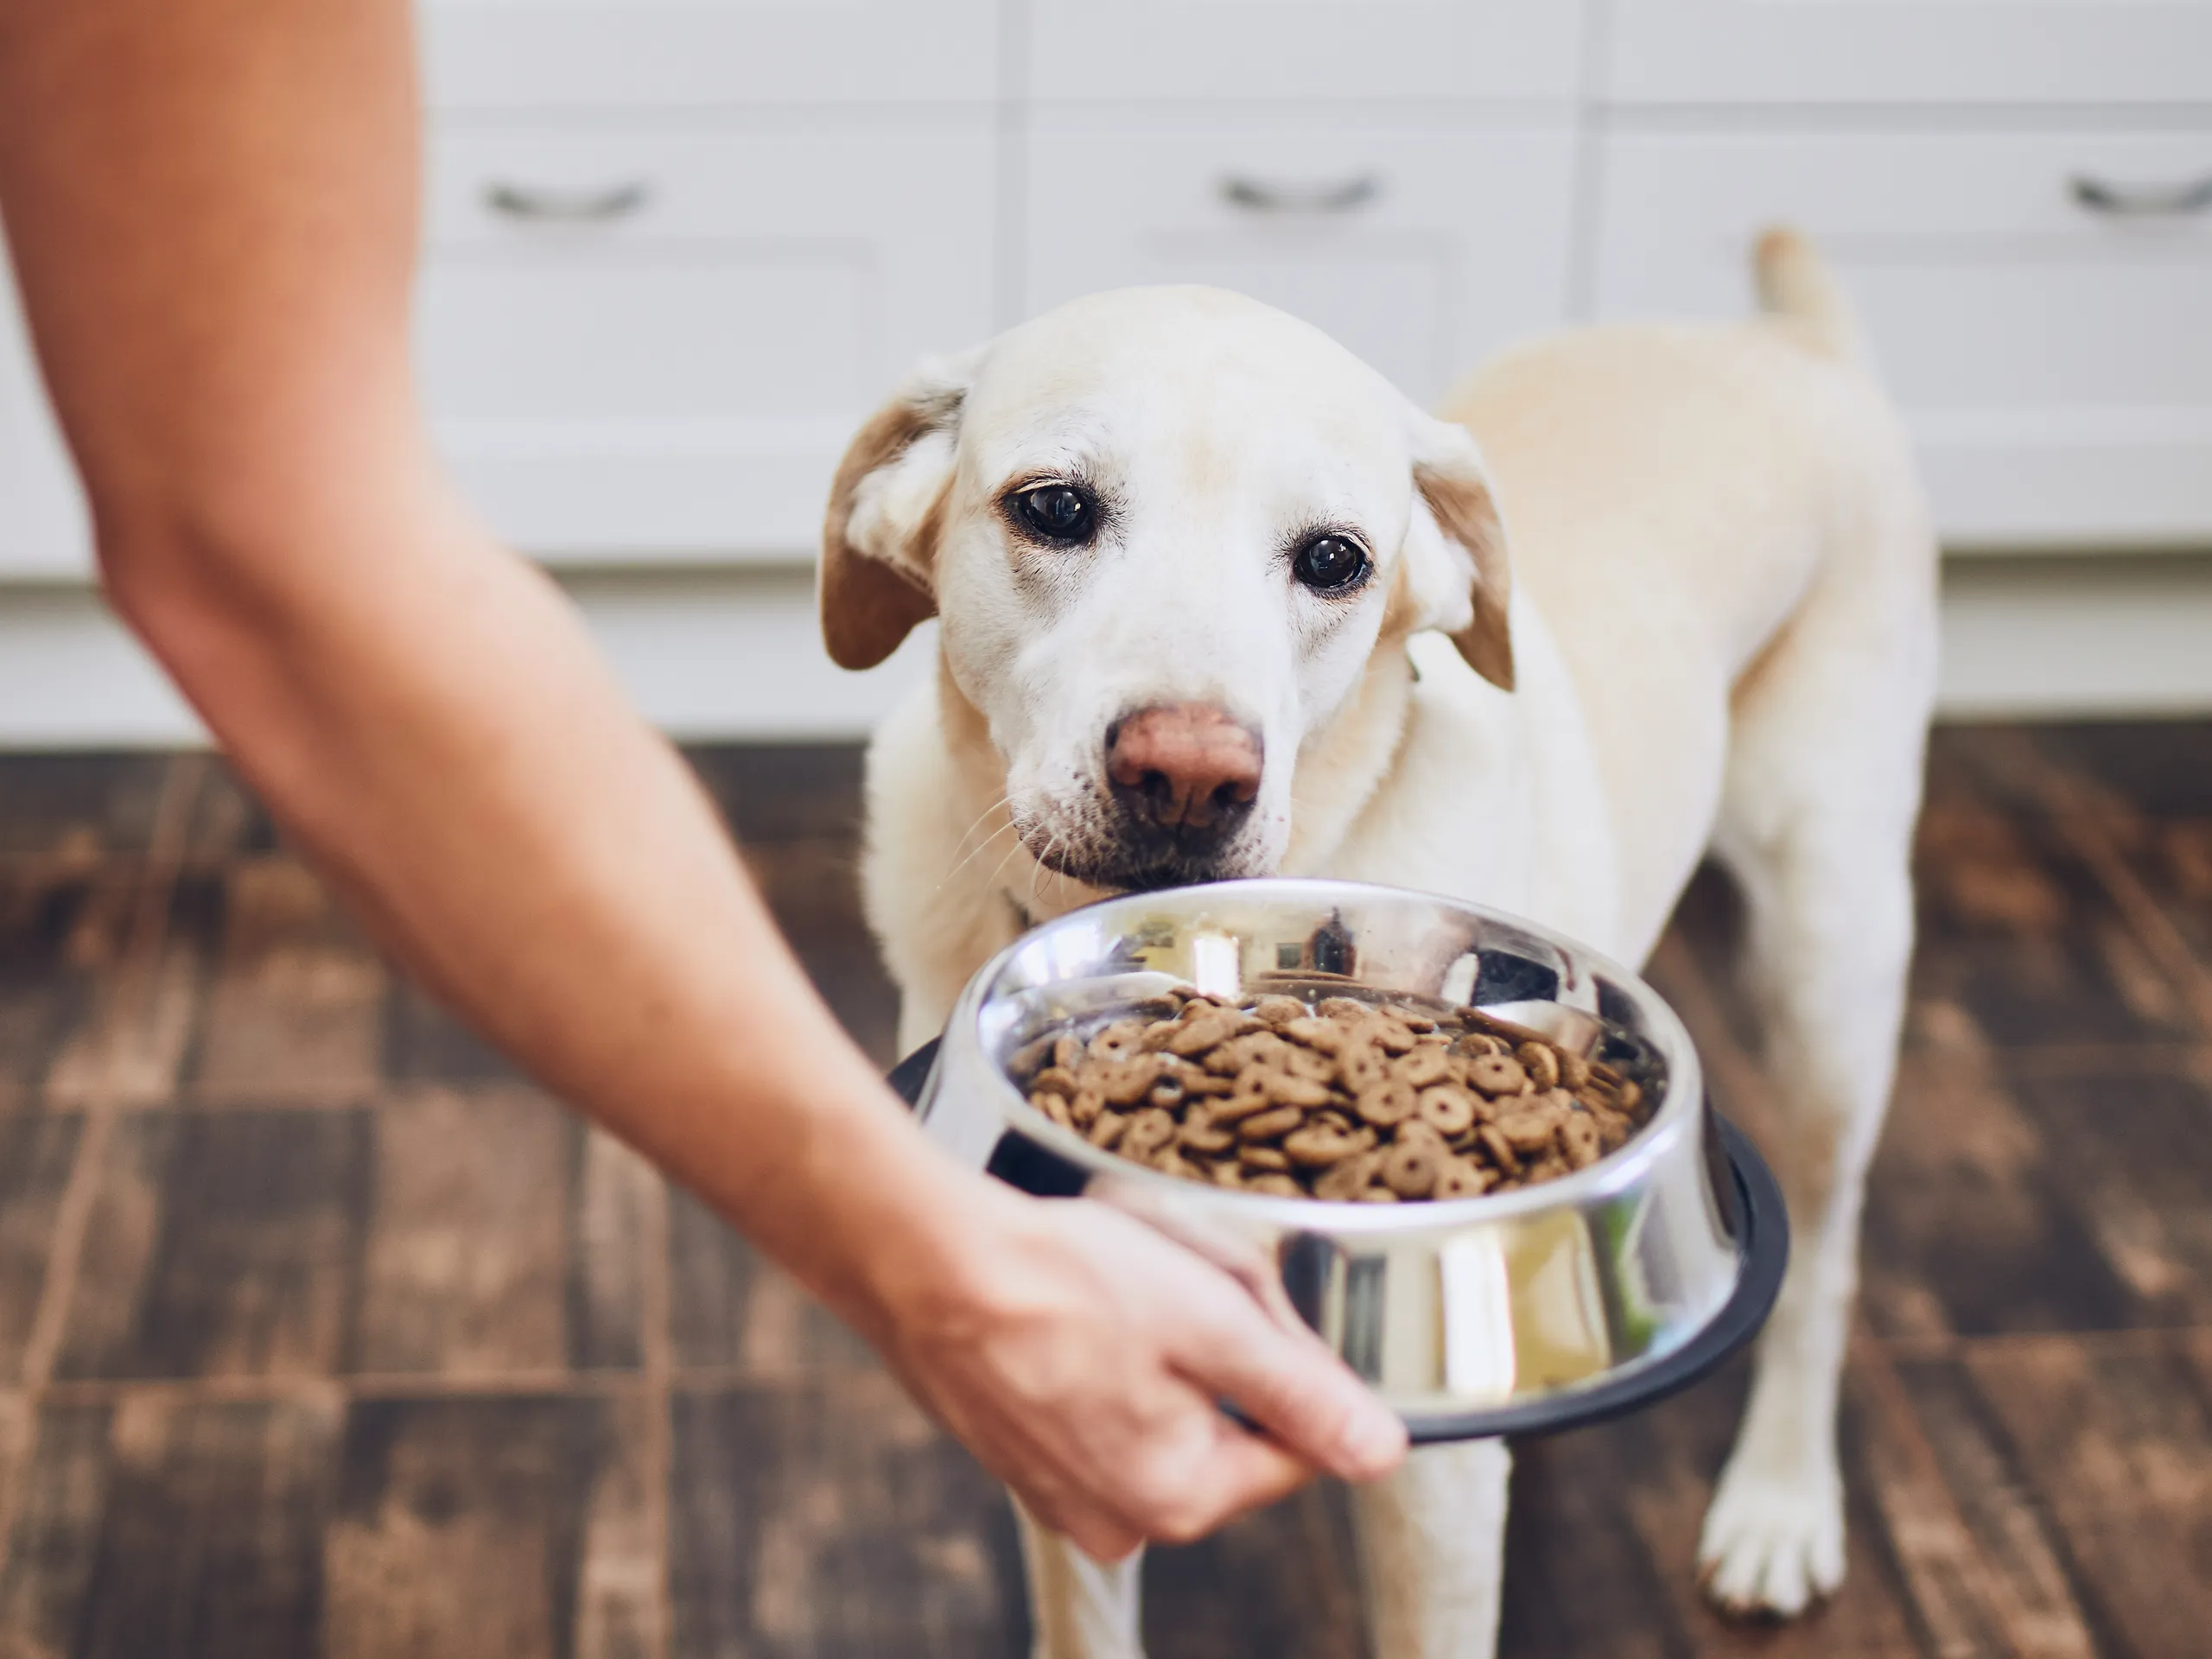 Should you wash your dog’s food bowl?